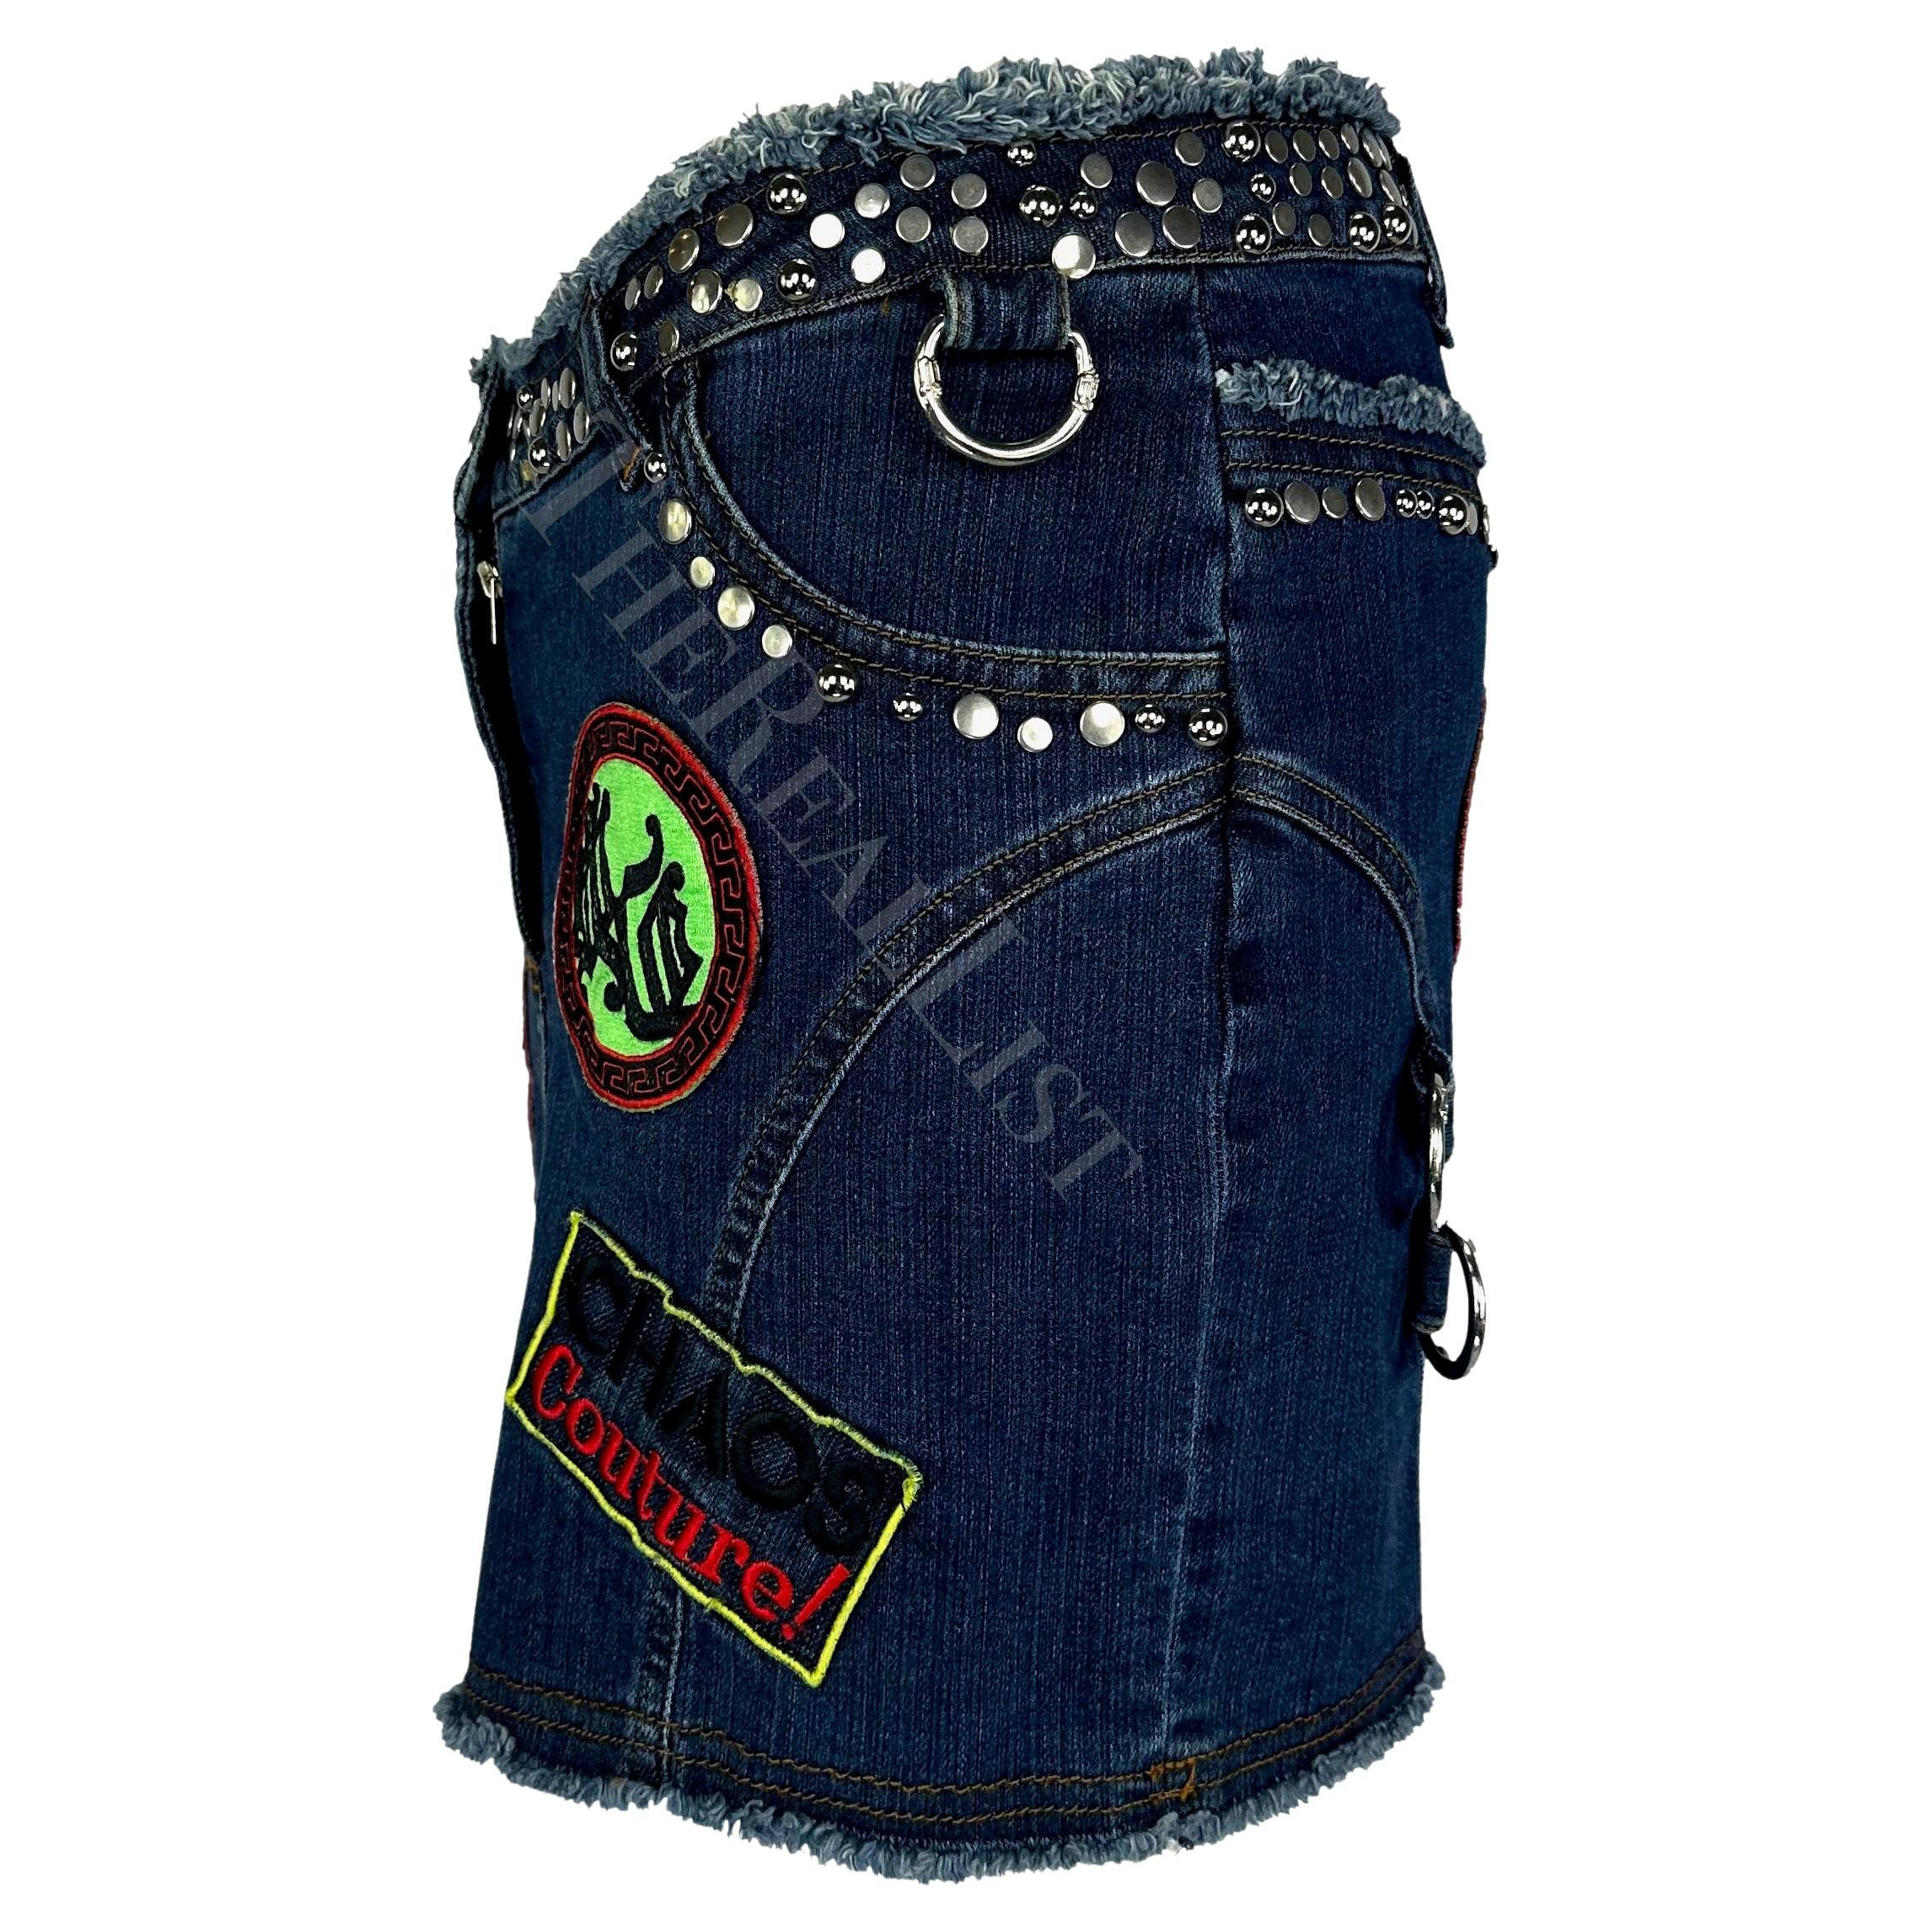 S/S 2005 Versace by Donatella Chaos Couture Studded Denim Patch Vest Skirt Set For Sale 8